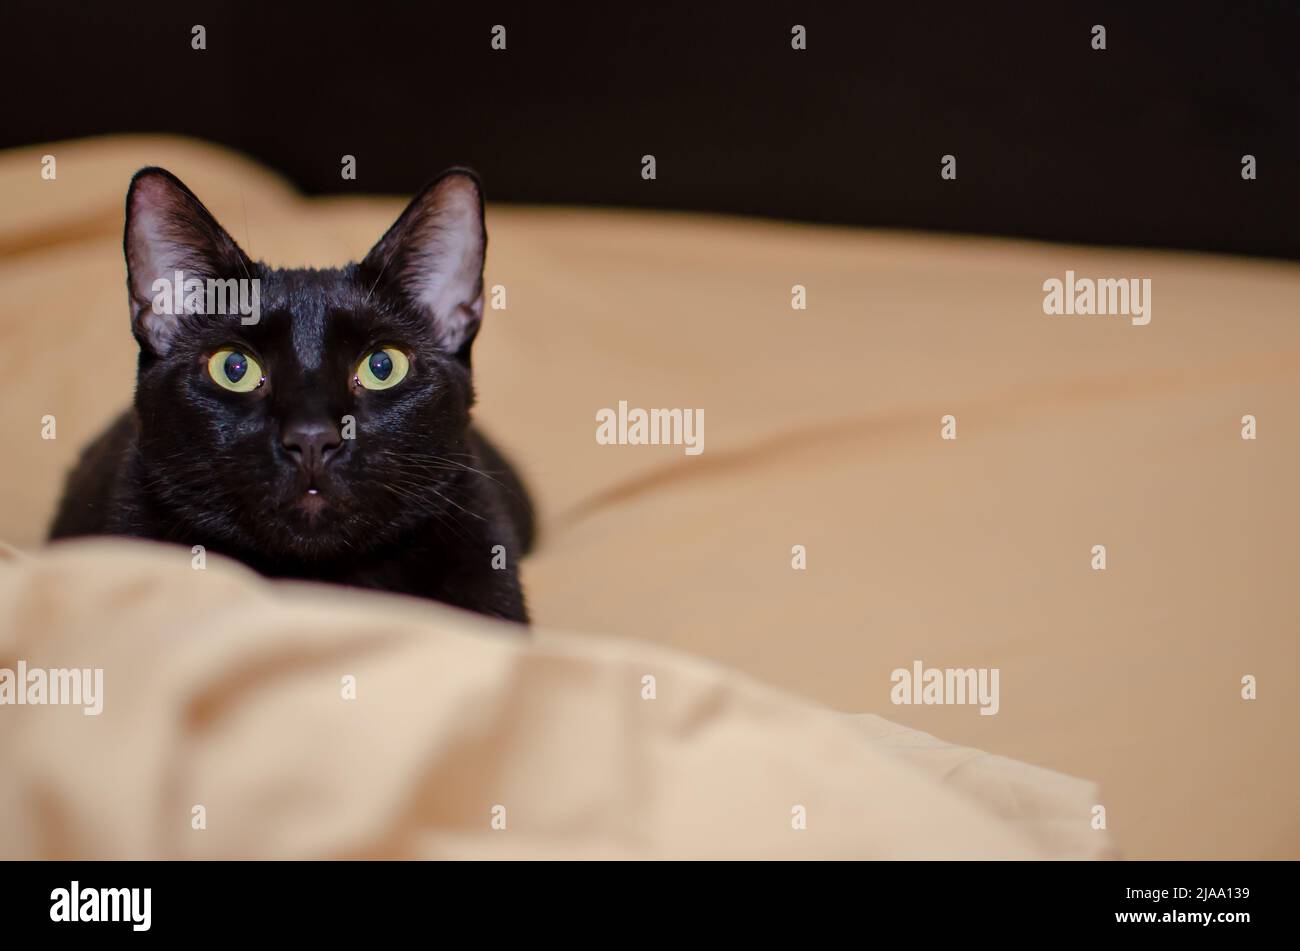 Black Cat with Gold Eyes on Gold Sheets, eye level, indoors, stark contrast, dark background. Stock Photo